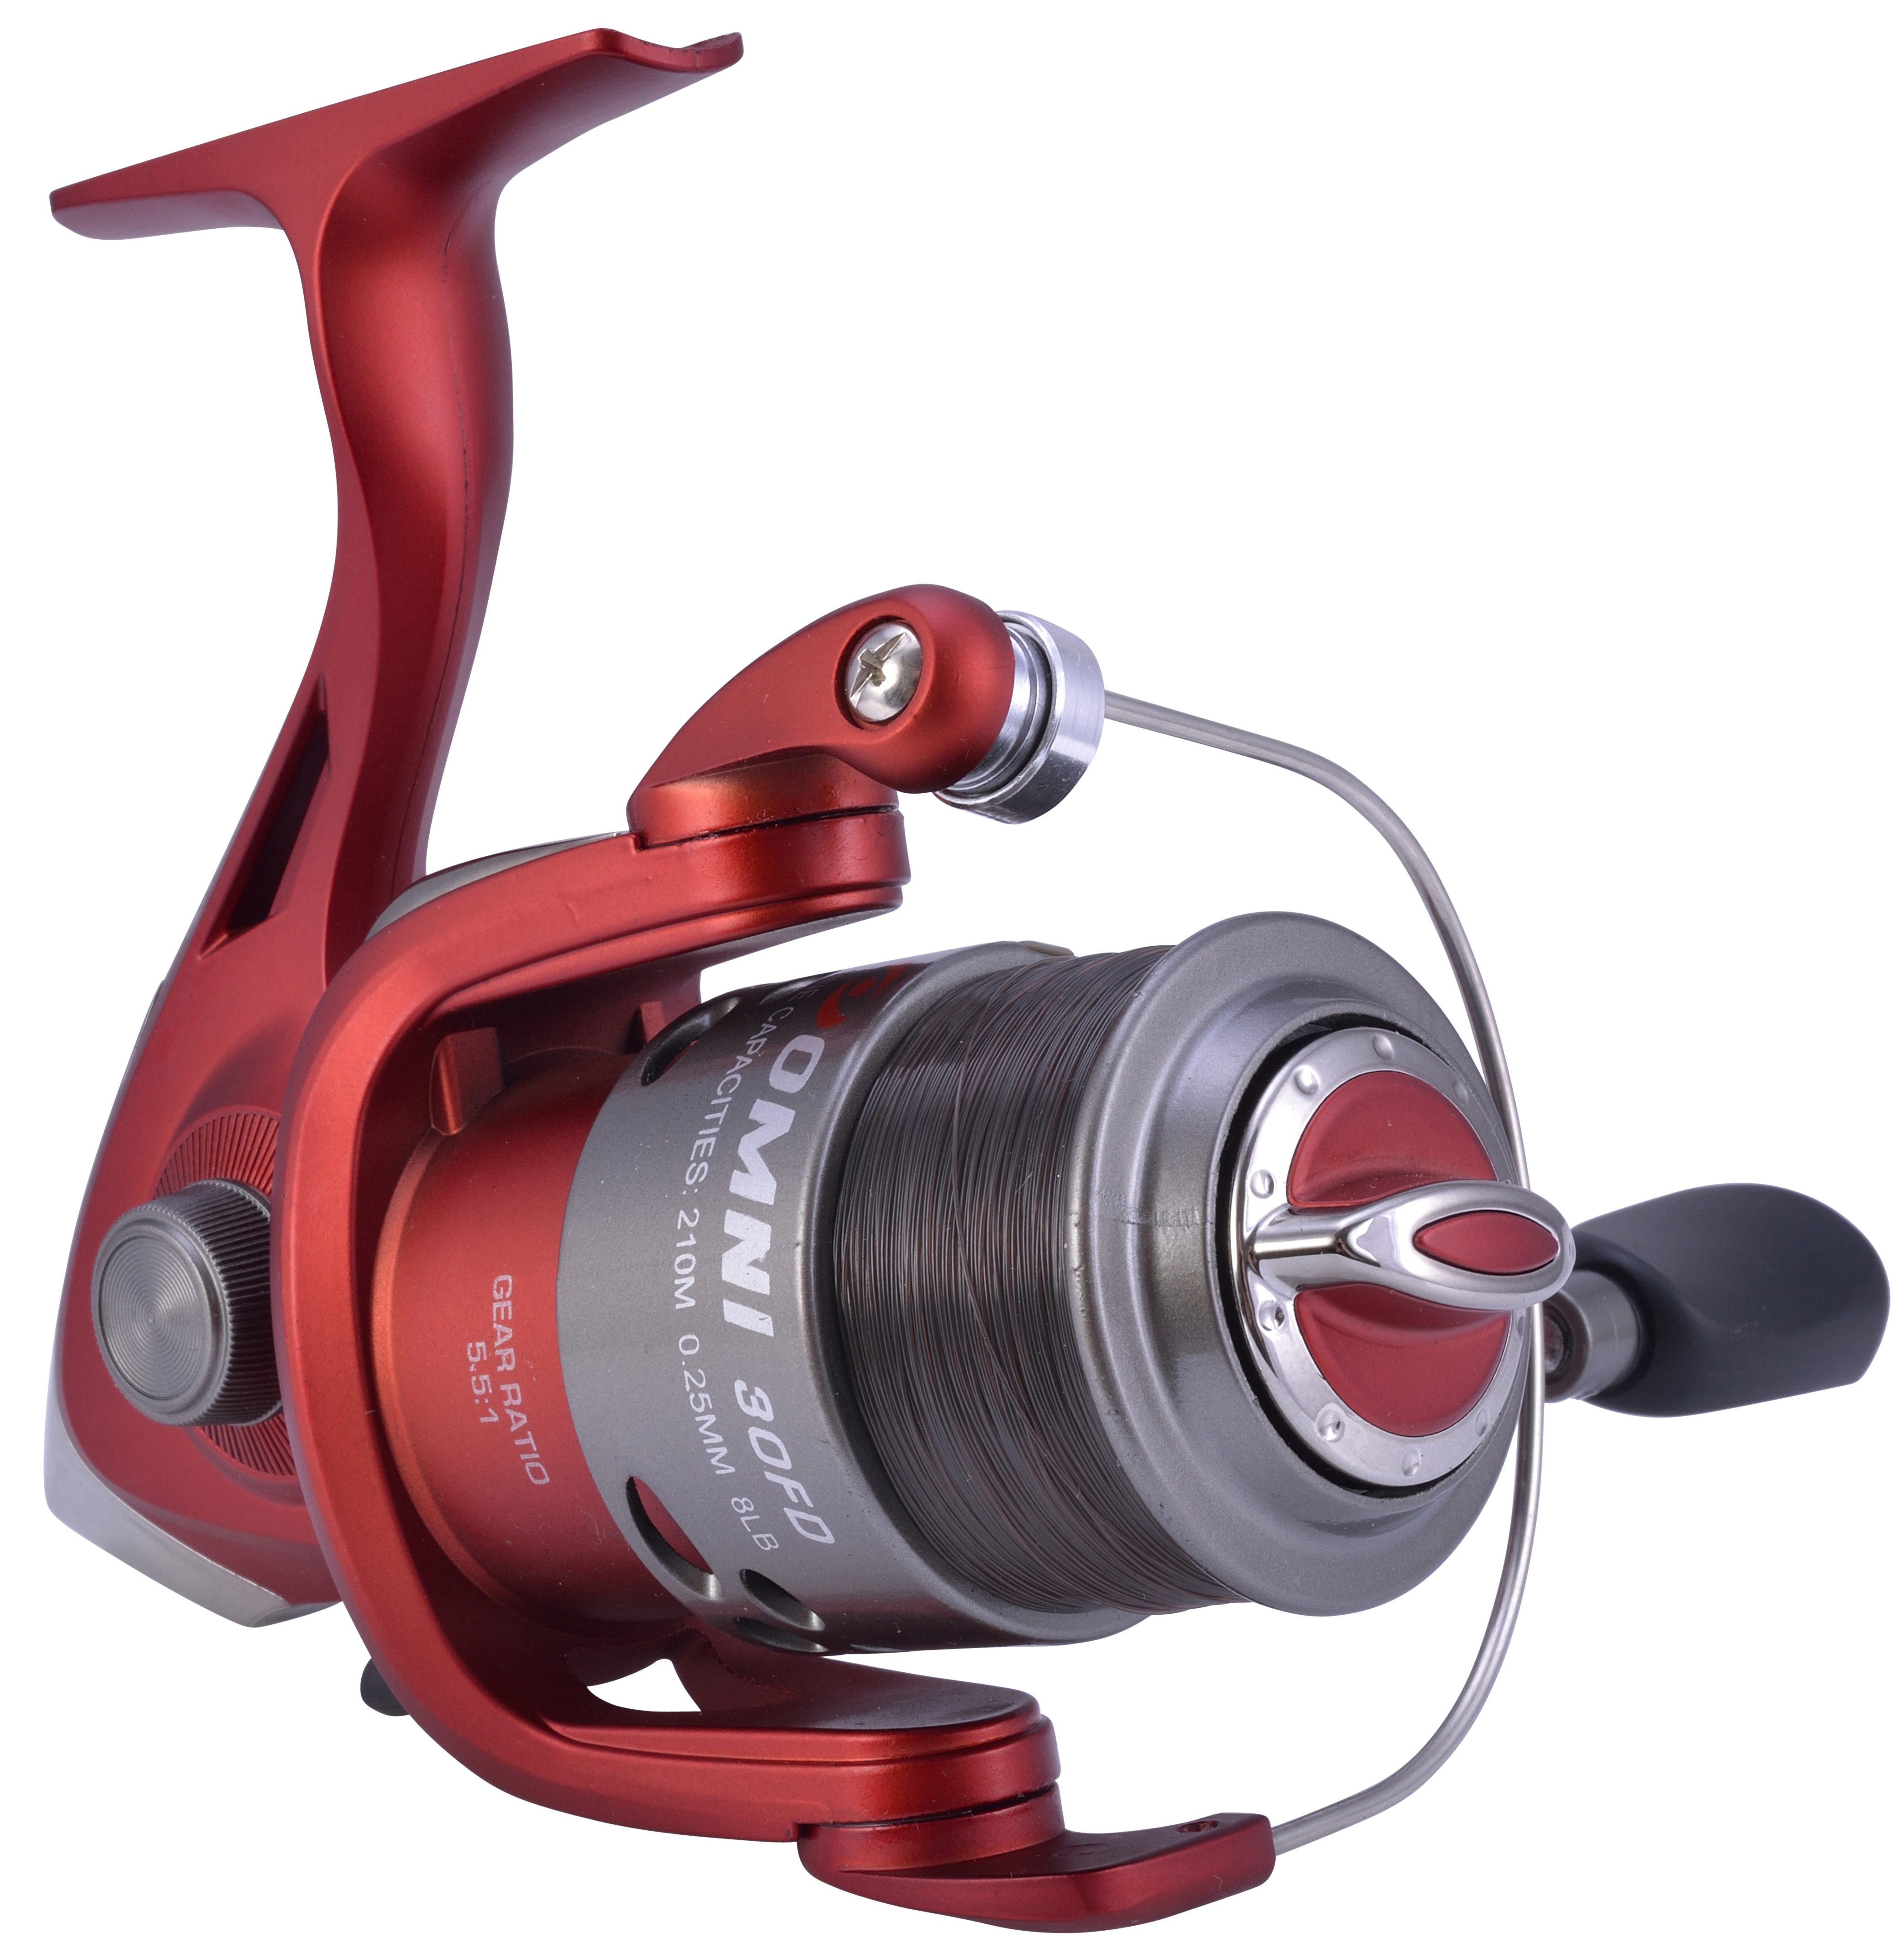 Shakespeare Omni Rd Arrière Glisser Fishing Reel-Toutes Tailles 